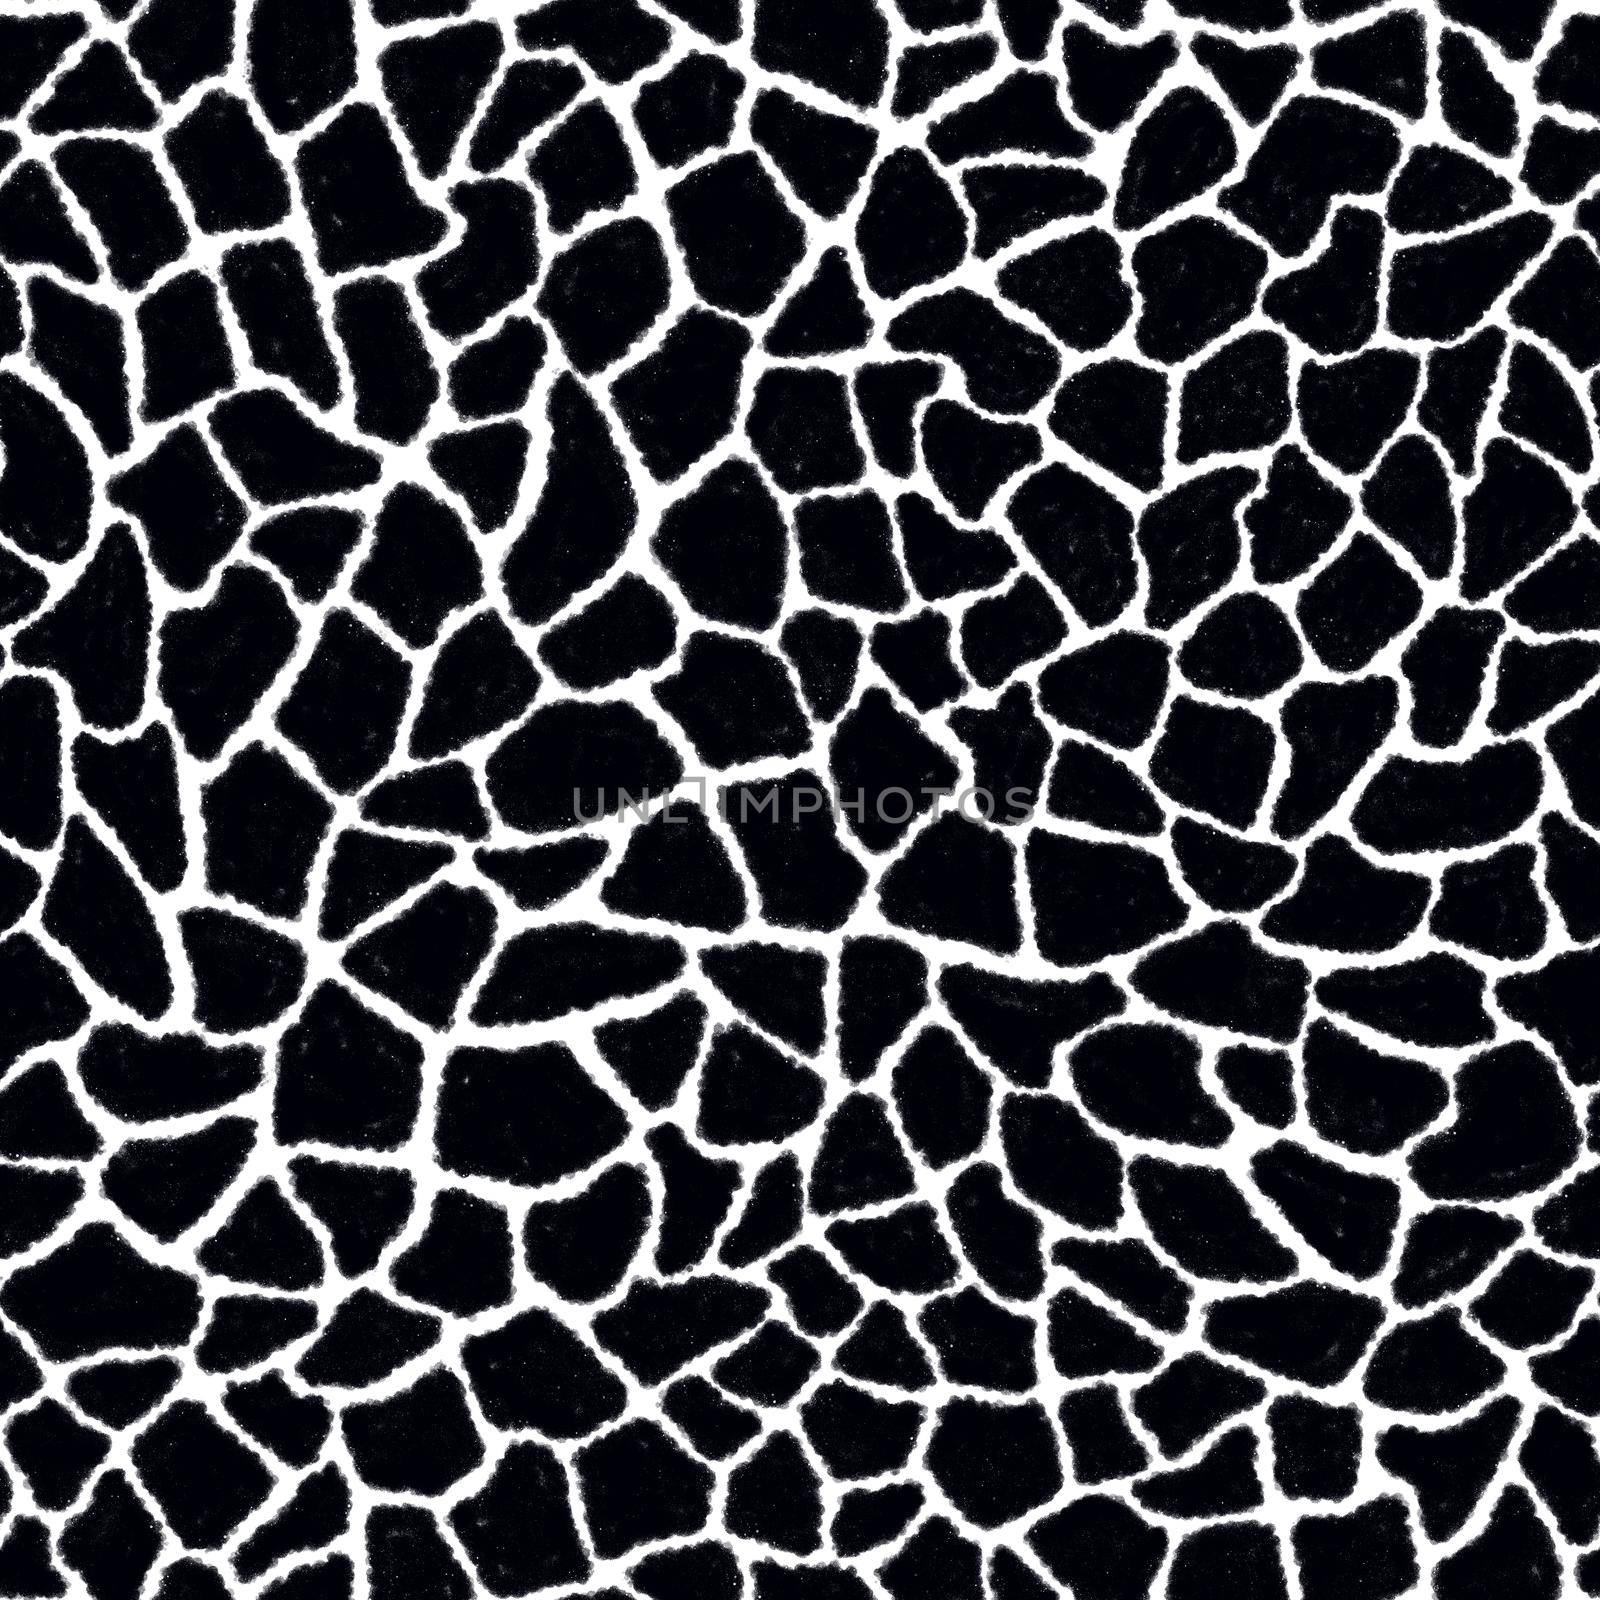 Giraffe skin color seamless pattern with fashion animal print for continuous replicate. Chaotic mosaic black pieces on white background. Wrapping paper, funny textile fabric print,design,decor by Angelsmoon